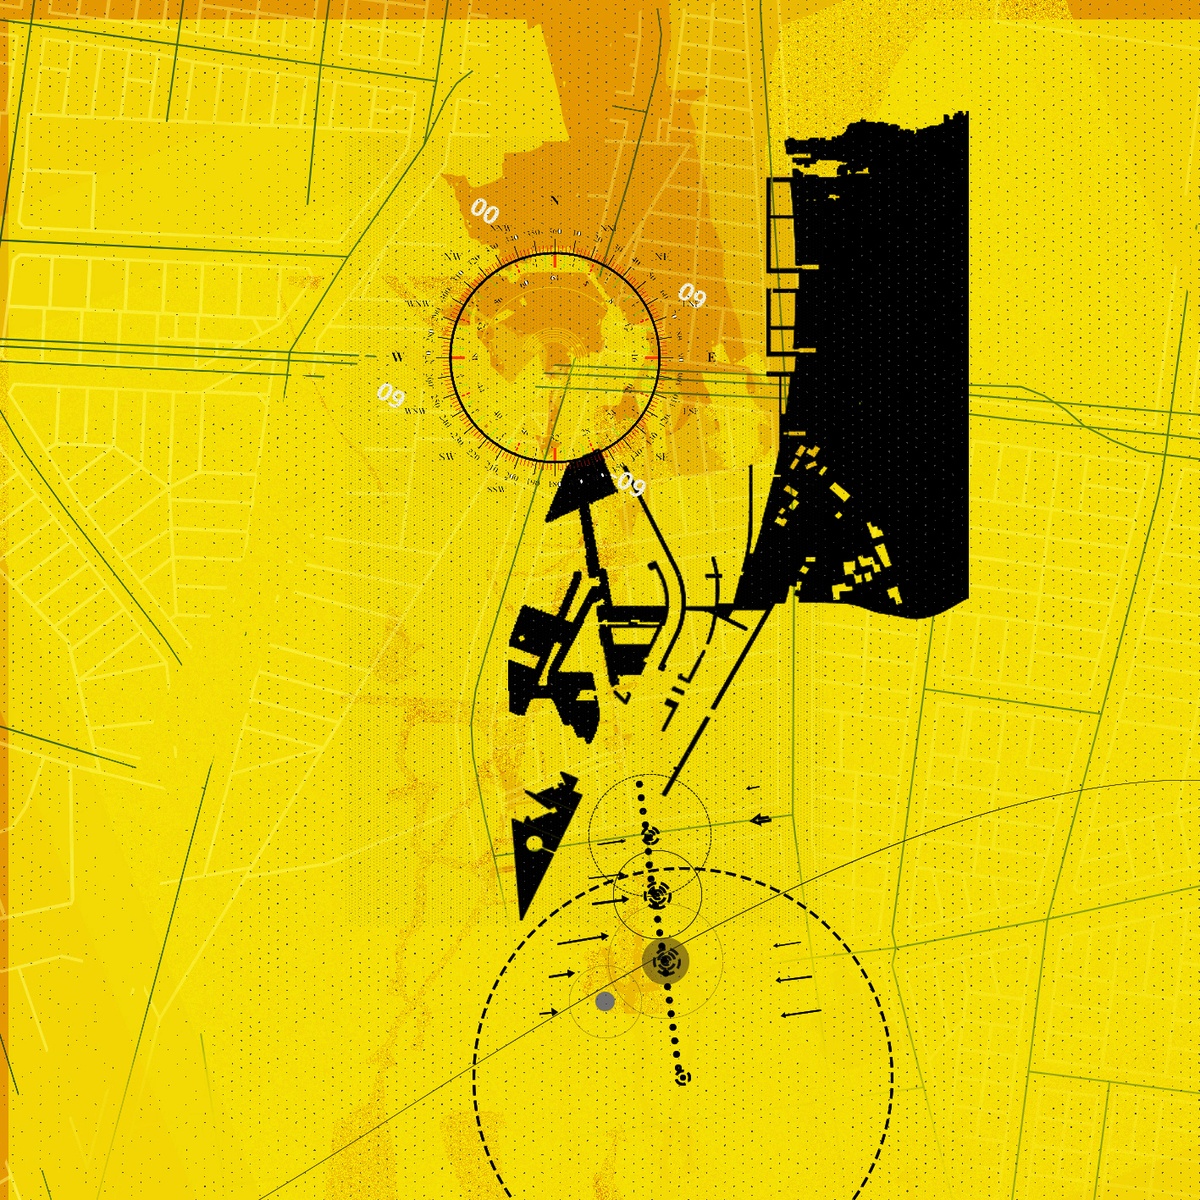 Process photograph from the 2018 rendition of the City Research Studio exchange with the African Centre for Cities. A graphical representation of a aerial map with compass directions indicated.
